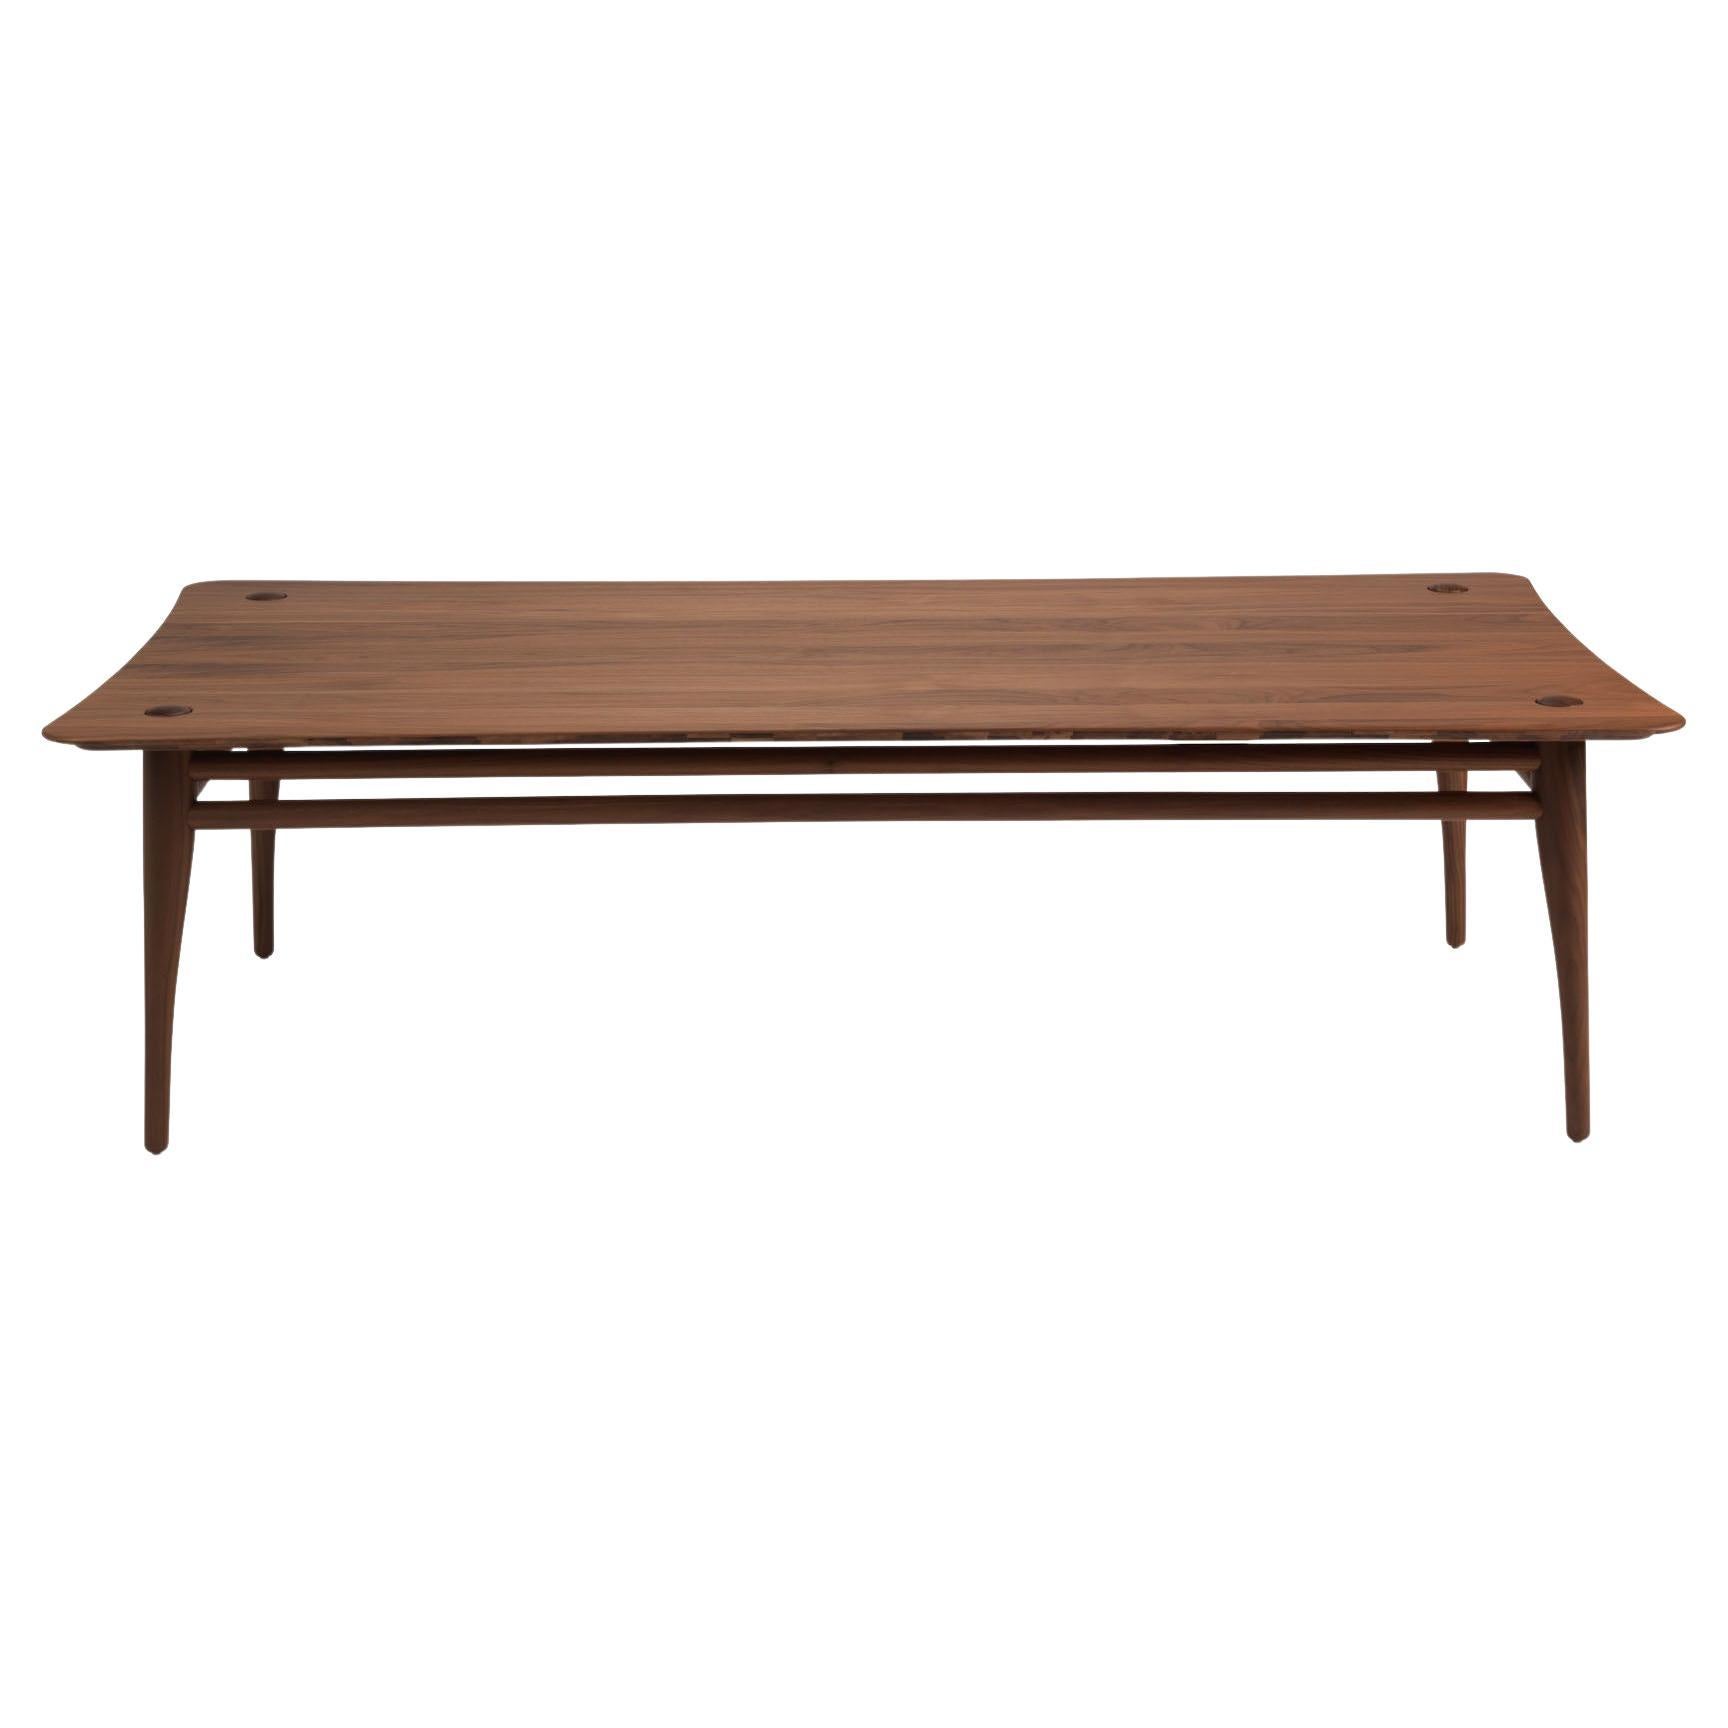 Revised Chilgrove - solid walnut coffee table - rectangle 160x80cm For Sale